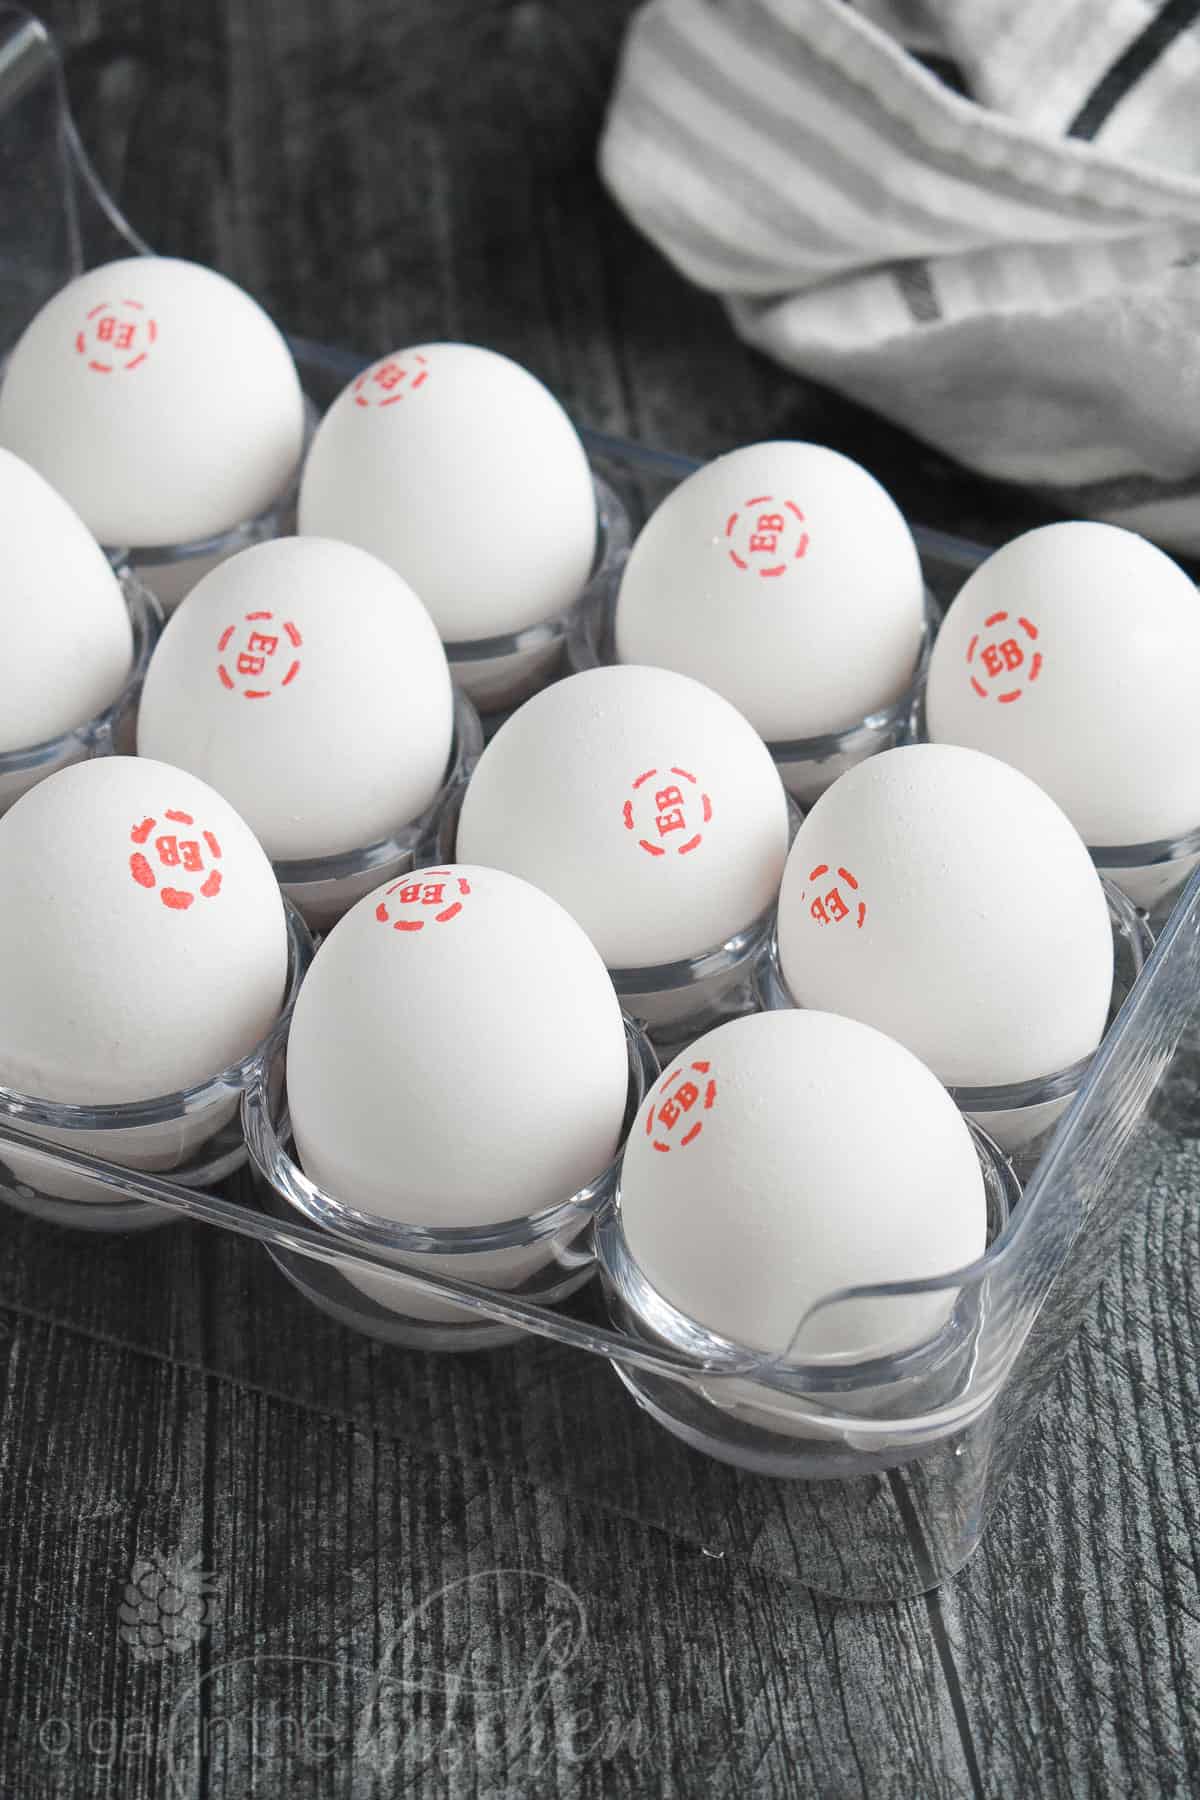 Learn how to make Hard Boiled Eggs. Everyone needs an easy go-to method for making perfectly cooked eggs every time. #hardboiledeggs #howtopeeleggs #boiledeggs #olgainthekitchen